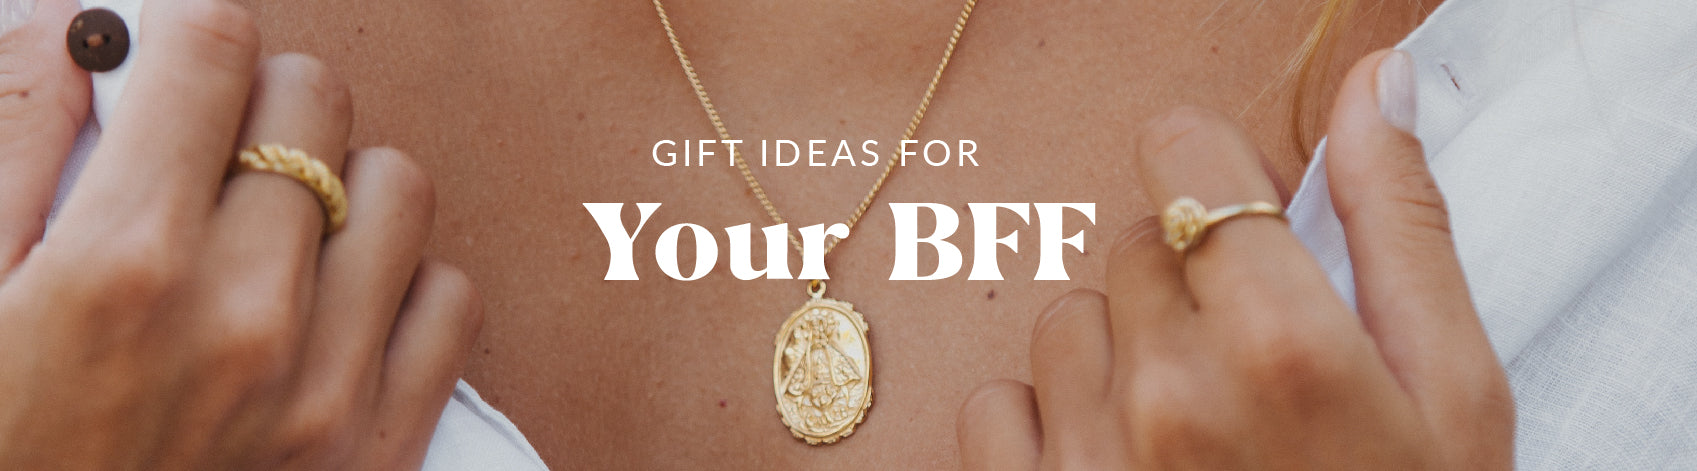 Gifts for your BFF